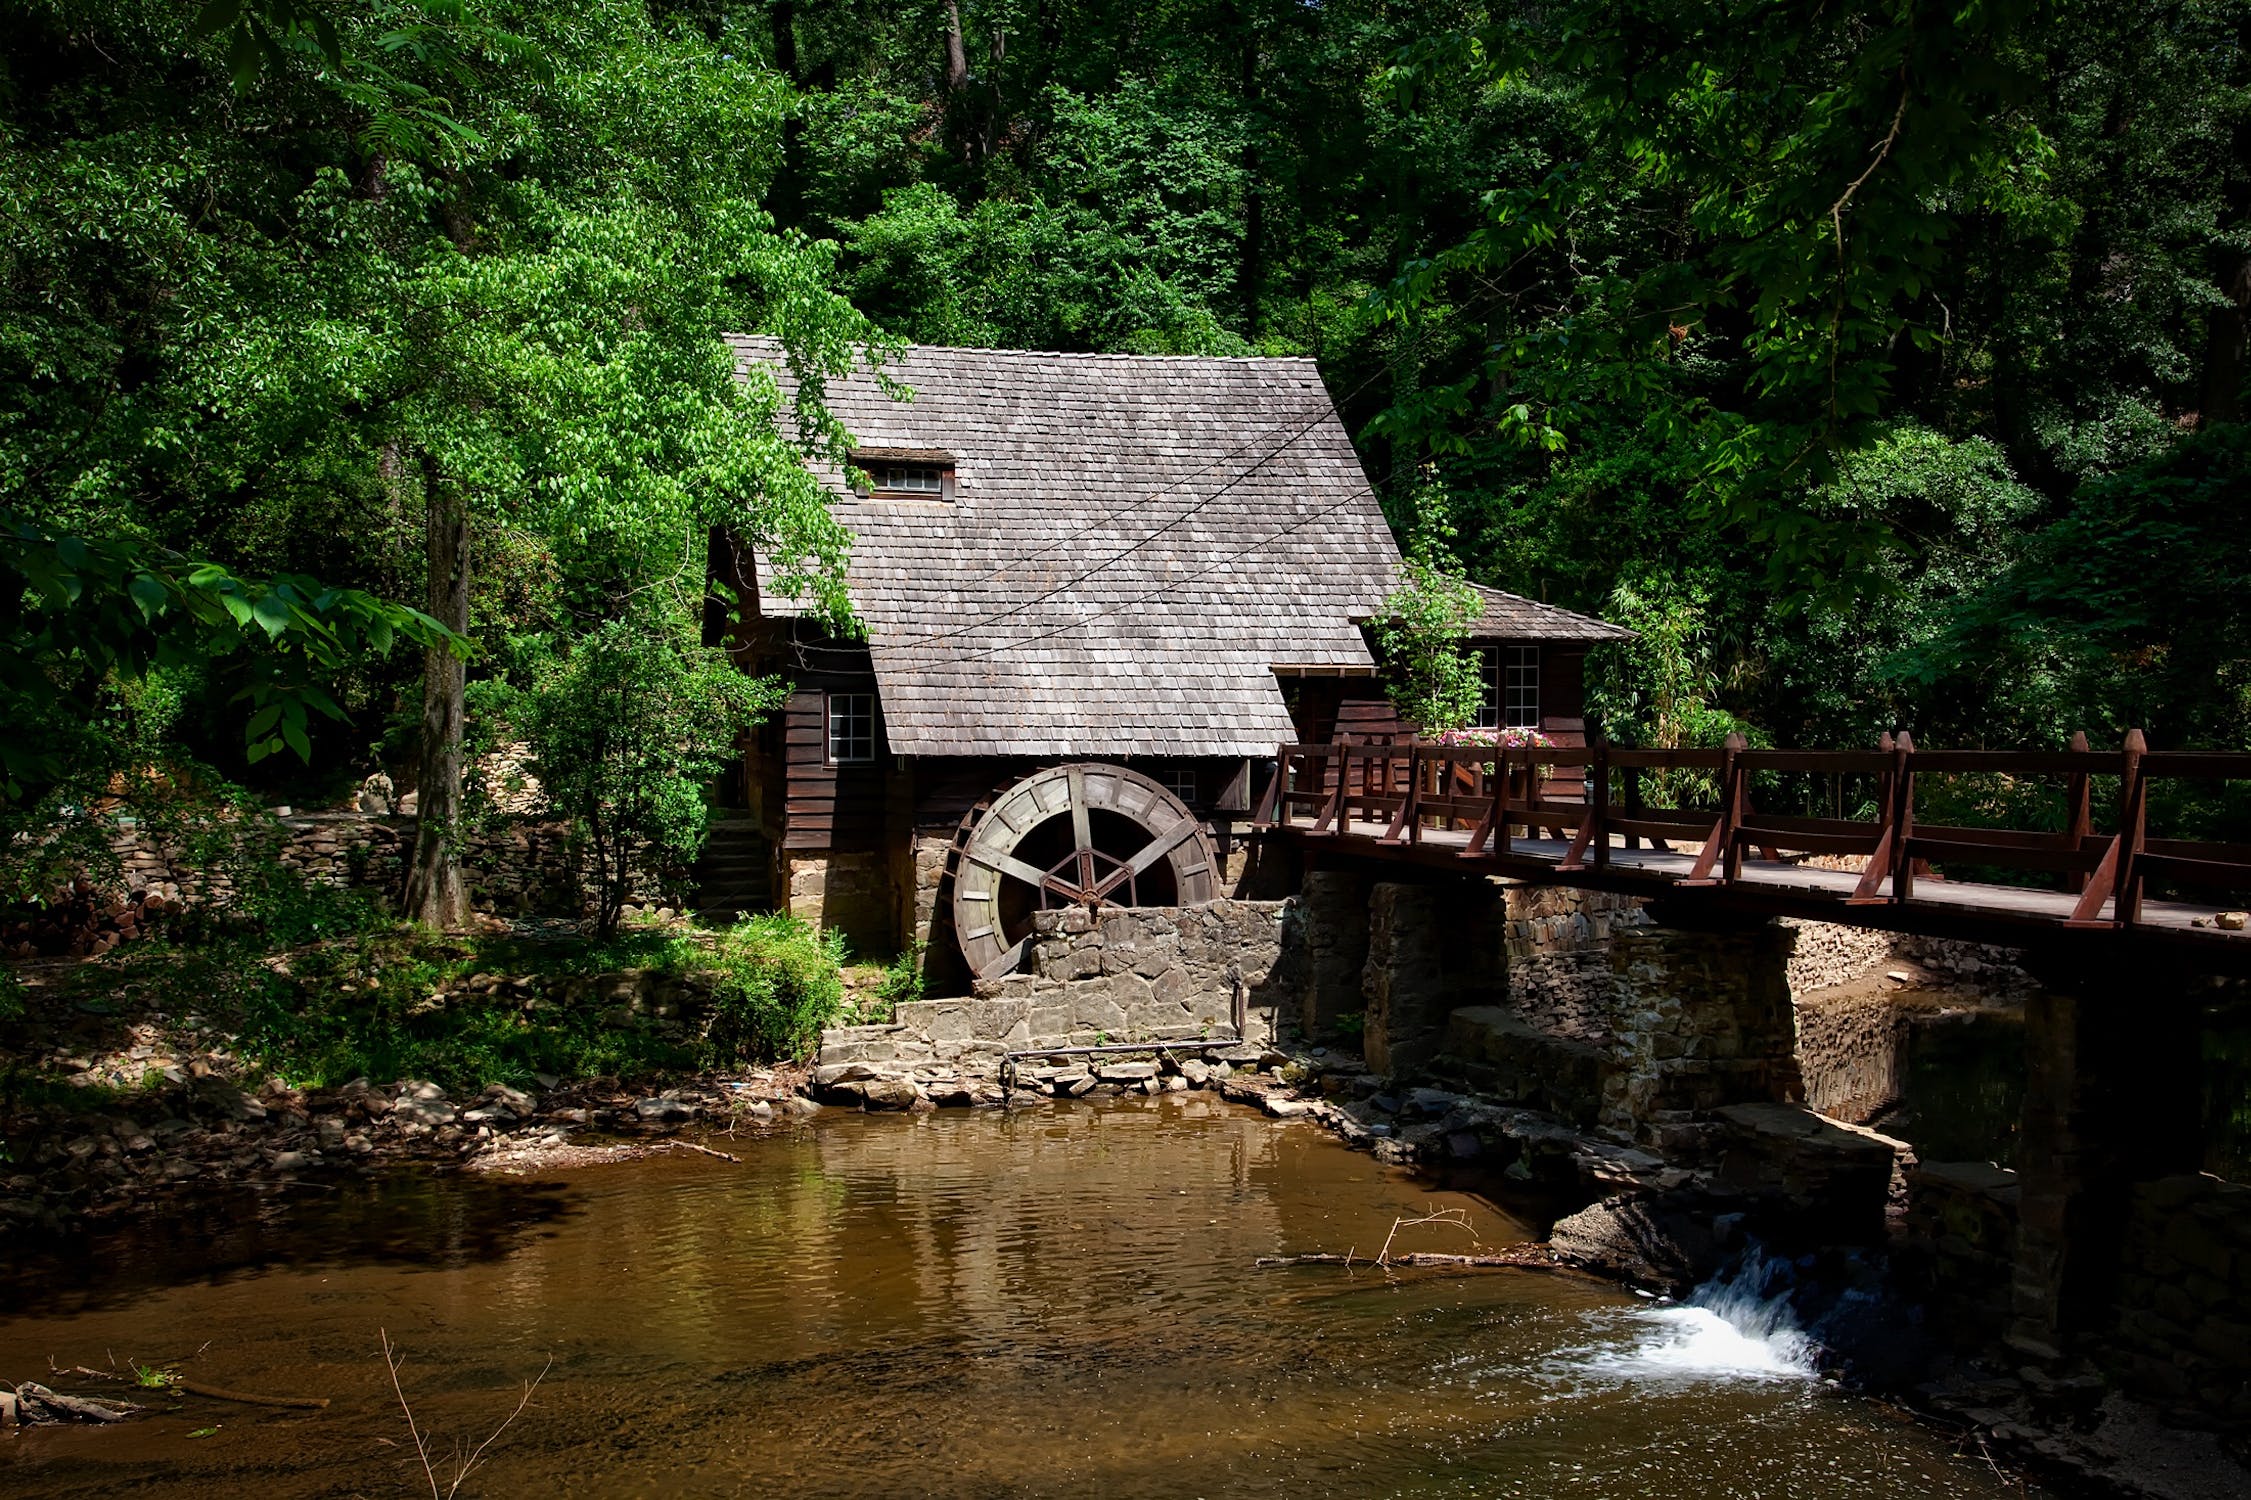 Photo of a mill by a river